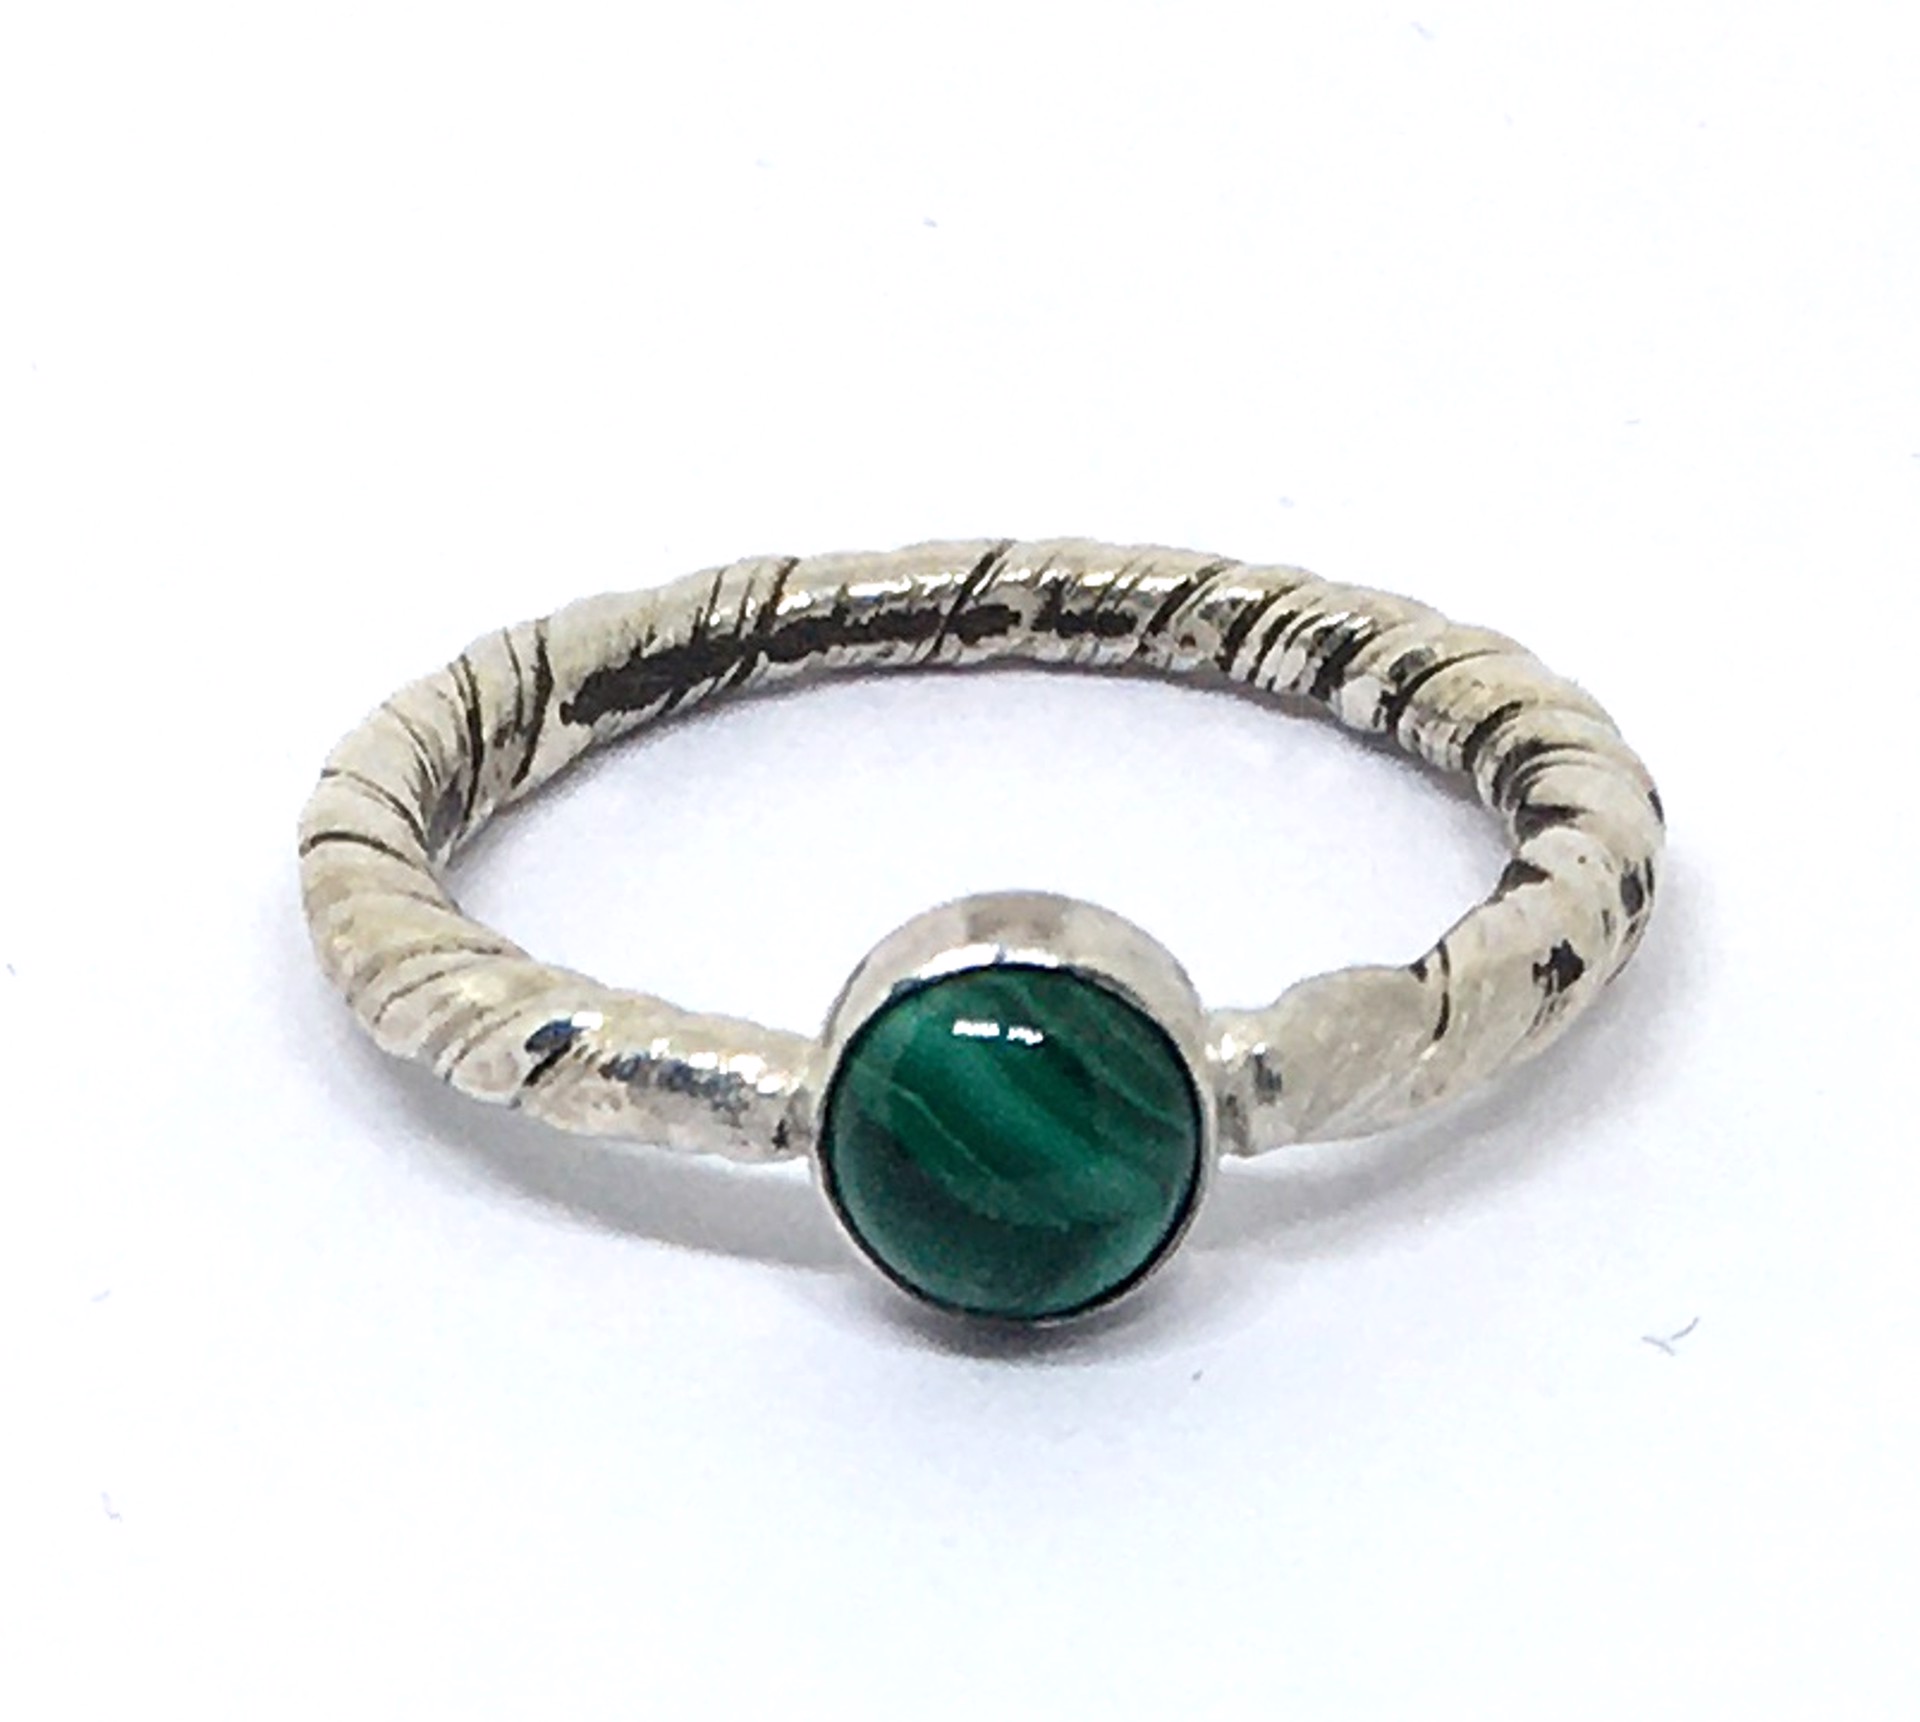 Mitsuro Hikime Twist Ring with Malachite in Sterling Silver - Size 7 by Melicia Phillips